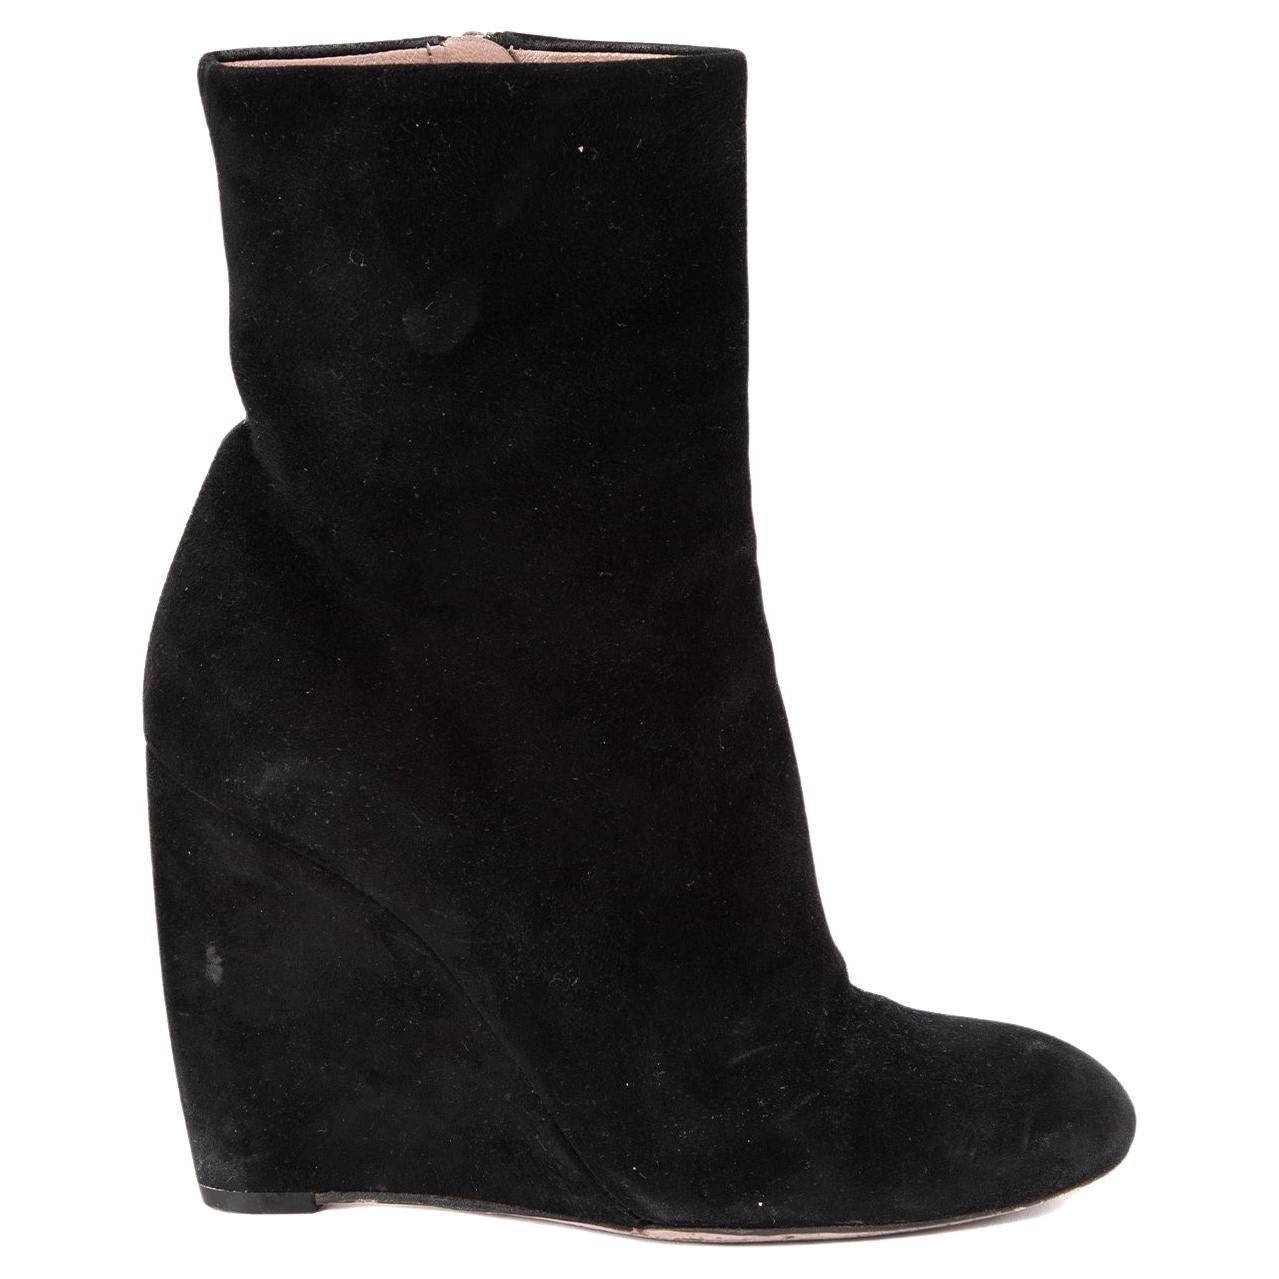 Pre-Loved Gucci Women's Black Suede Wedged Ankle Boots For Sale